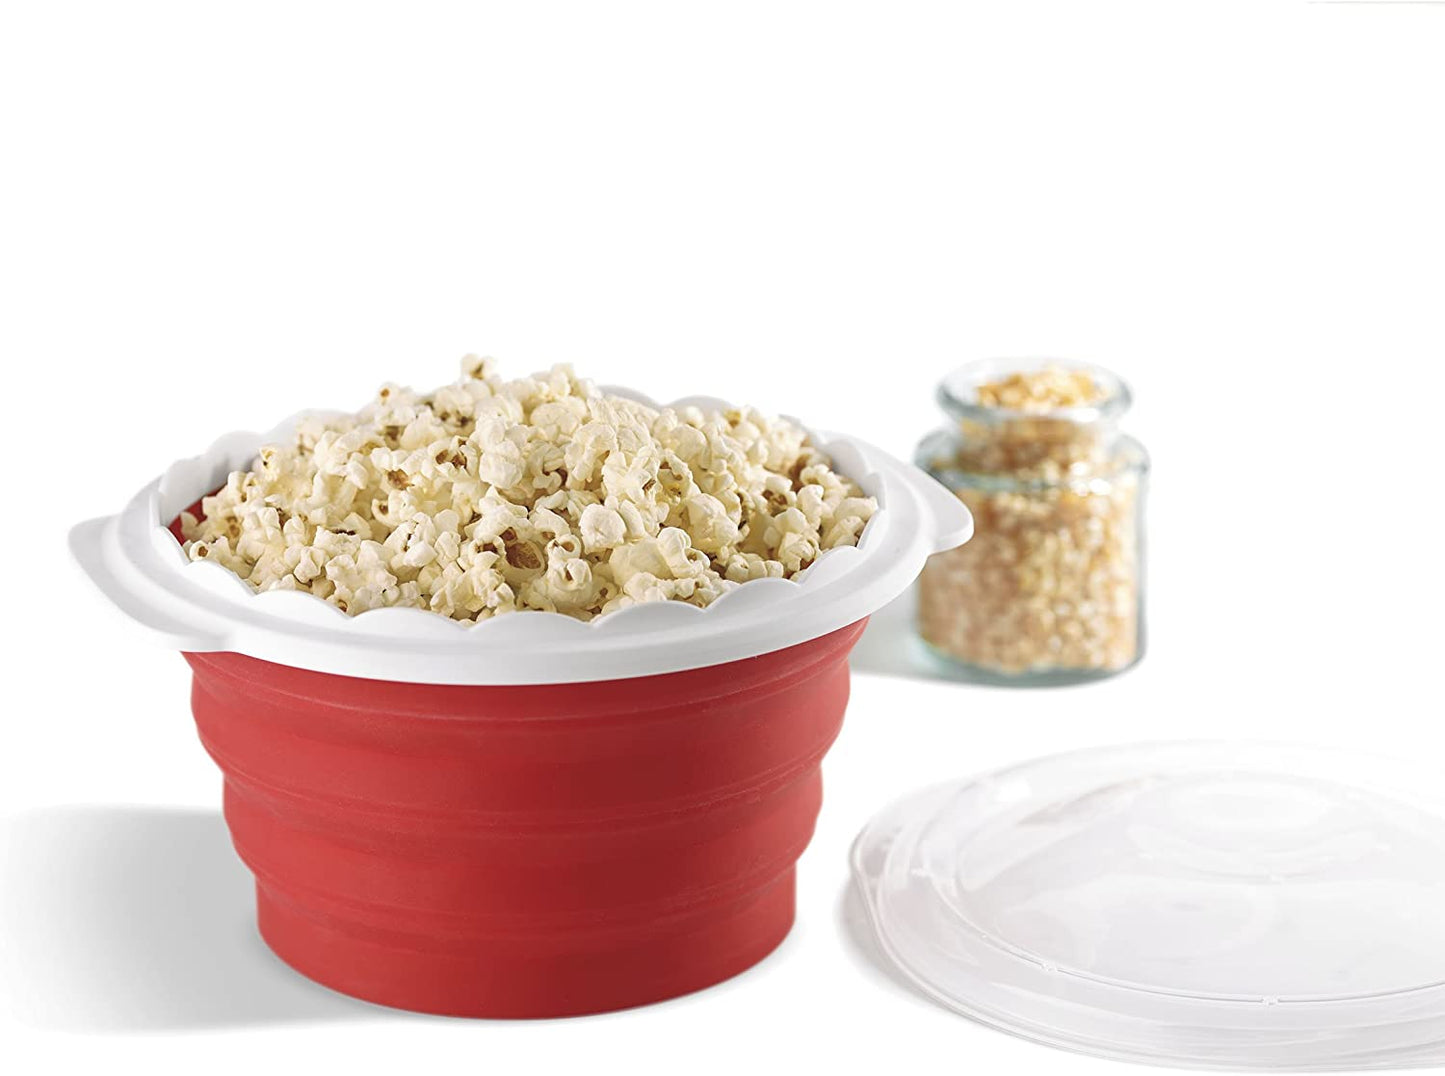 Cuisinart CTG-00-MPM, Microwave Popcorn Maker, One Size, Red – Second Chance Thrift Store